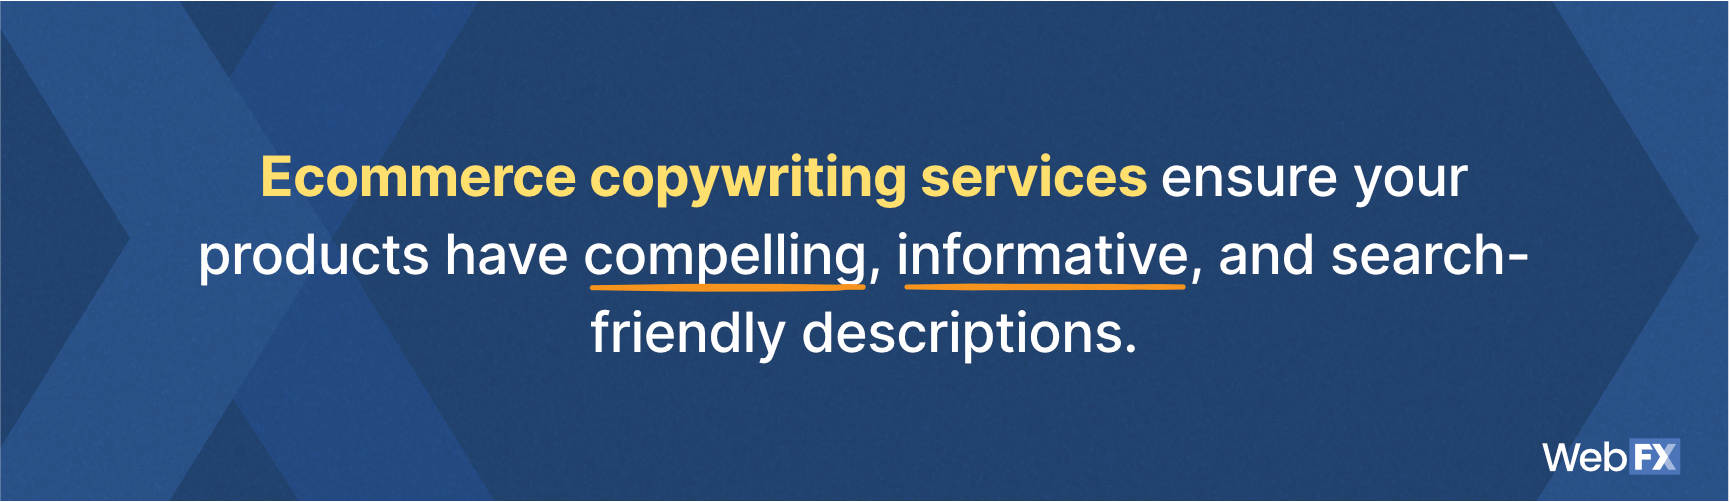 A statement on the value of ecommerce copywriting services to companies